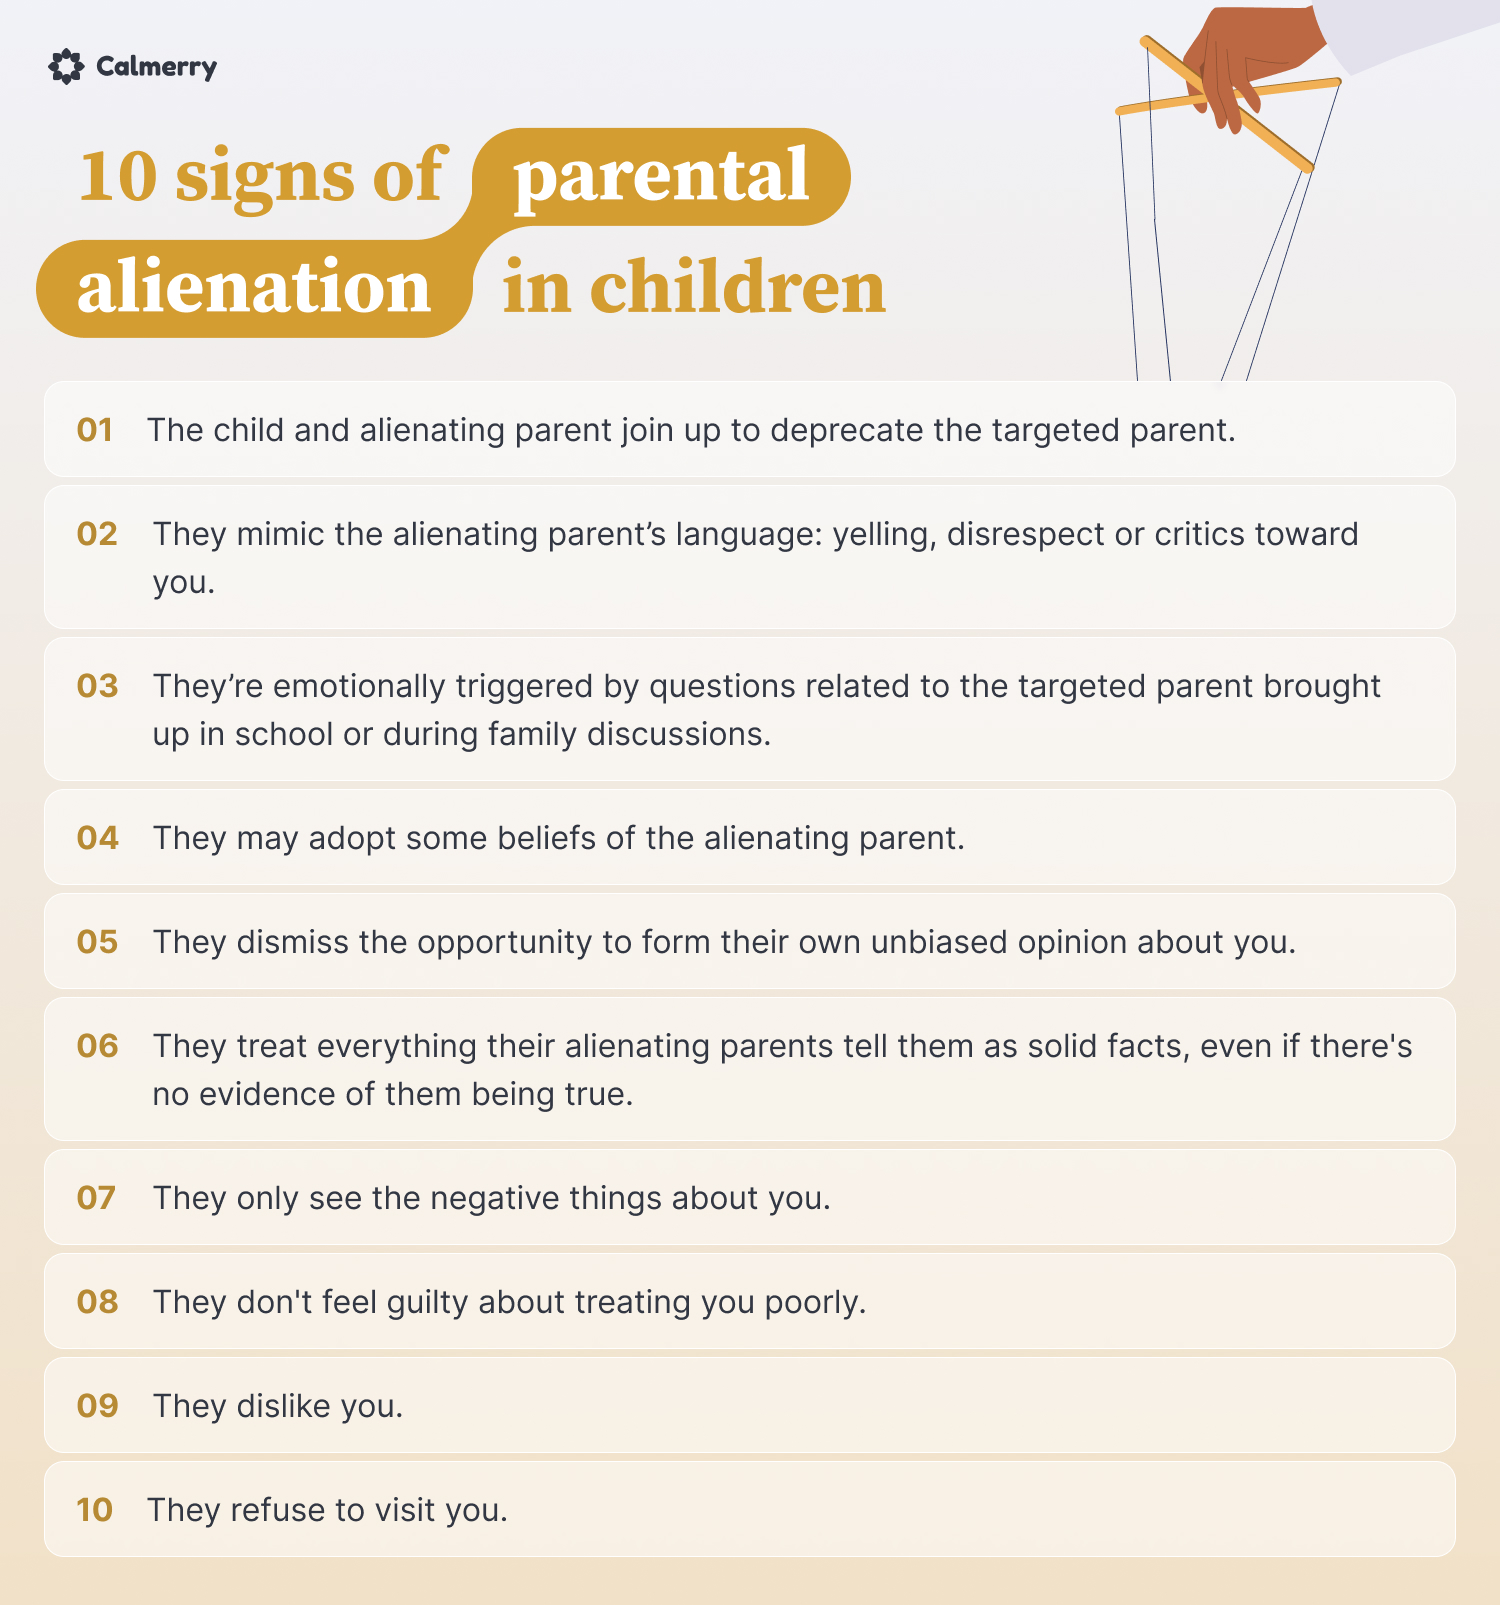 10 signs of parental alienation in children

They dislike you.
They mimic the alienating parent’s language: yelling, disrespect or critics toward you.
They refuse to visit you.
They may adopt some beliefs of the alienating parent.
They dismiss the opportunity to form their own unbiased opinion about you.
They treat everything their alienating parents tell them as solid facts, even if there's no evidence of them being true.
They only see the negative things about you.
They don't feel guilty about treating you poorly.
The child and alienating parent join up to deprecate the targeted parent.
They’re emotionally triggered by questions related to the targeted parent brought up in school or during family discussions.